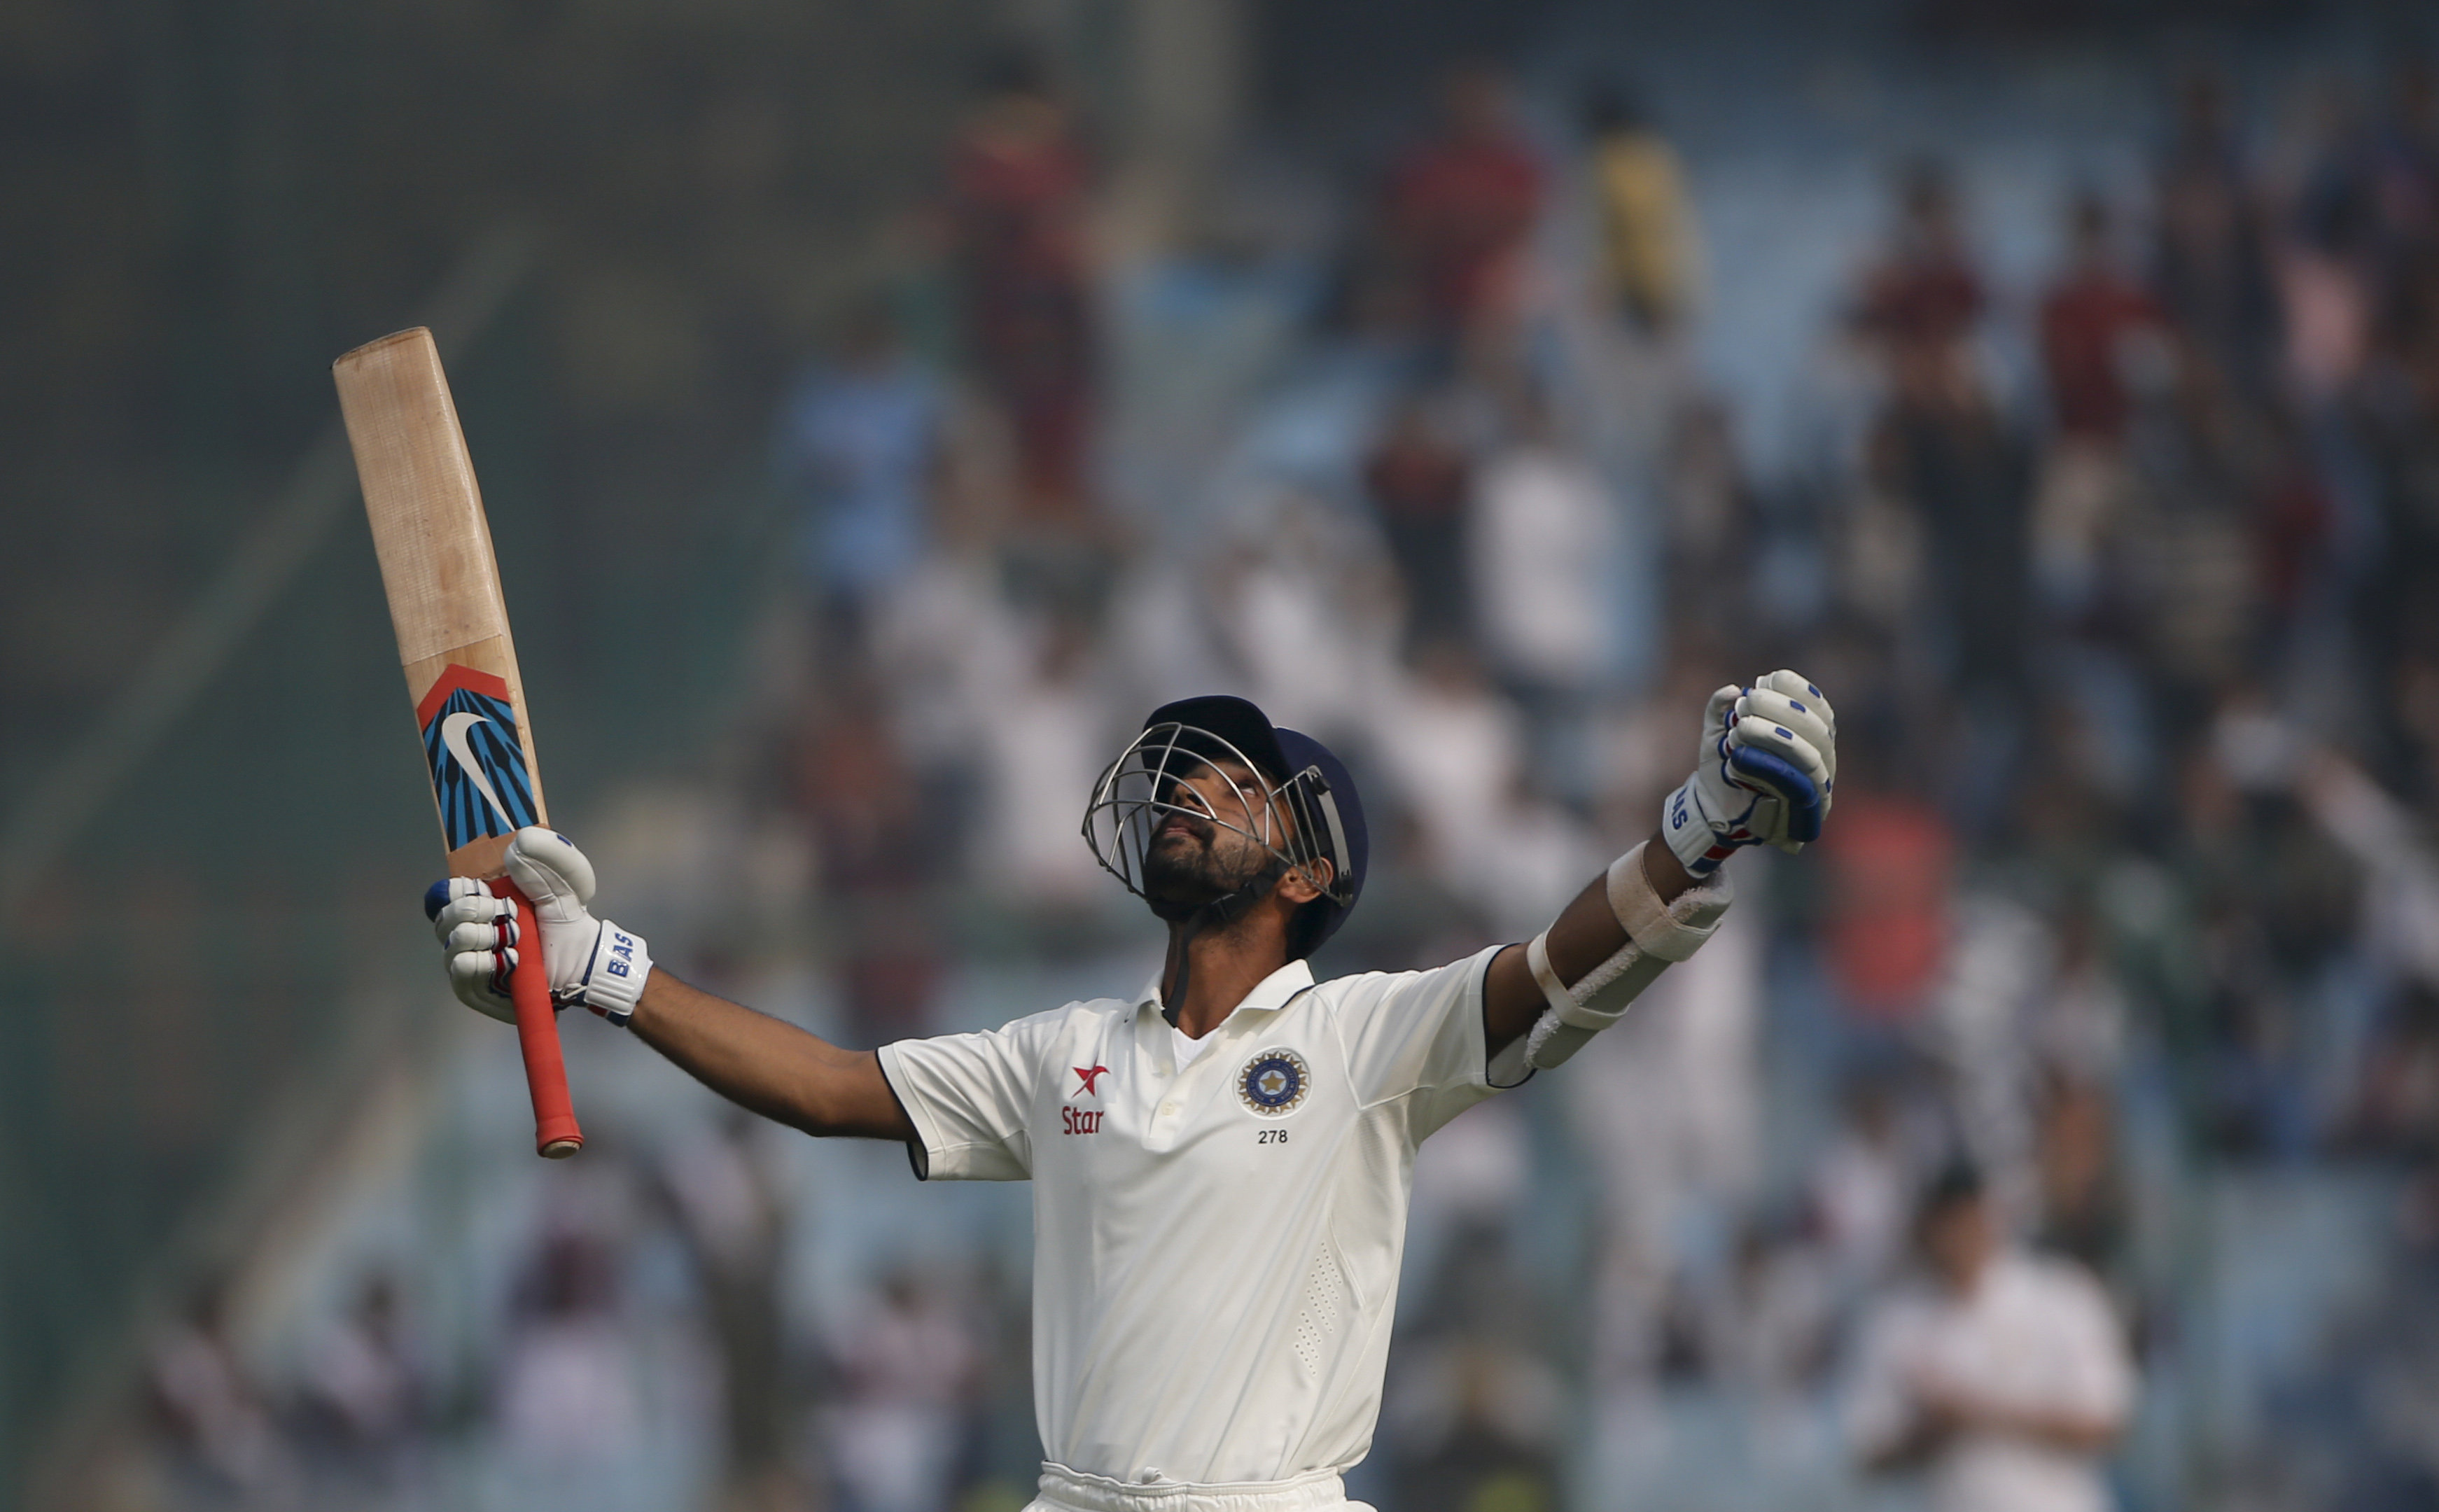 India's Ajinkya Rahane raises his bat after scoring hundred runs against South Africa on day four of their fourth and final test cricket match in New Delhi, India, Sunday, Dec. 6, 2015. Photo: Reuters